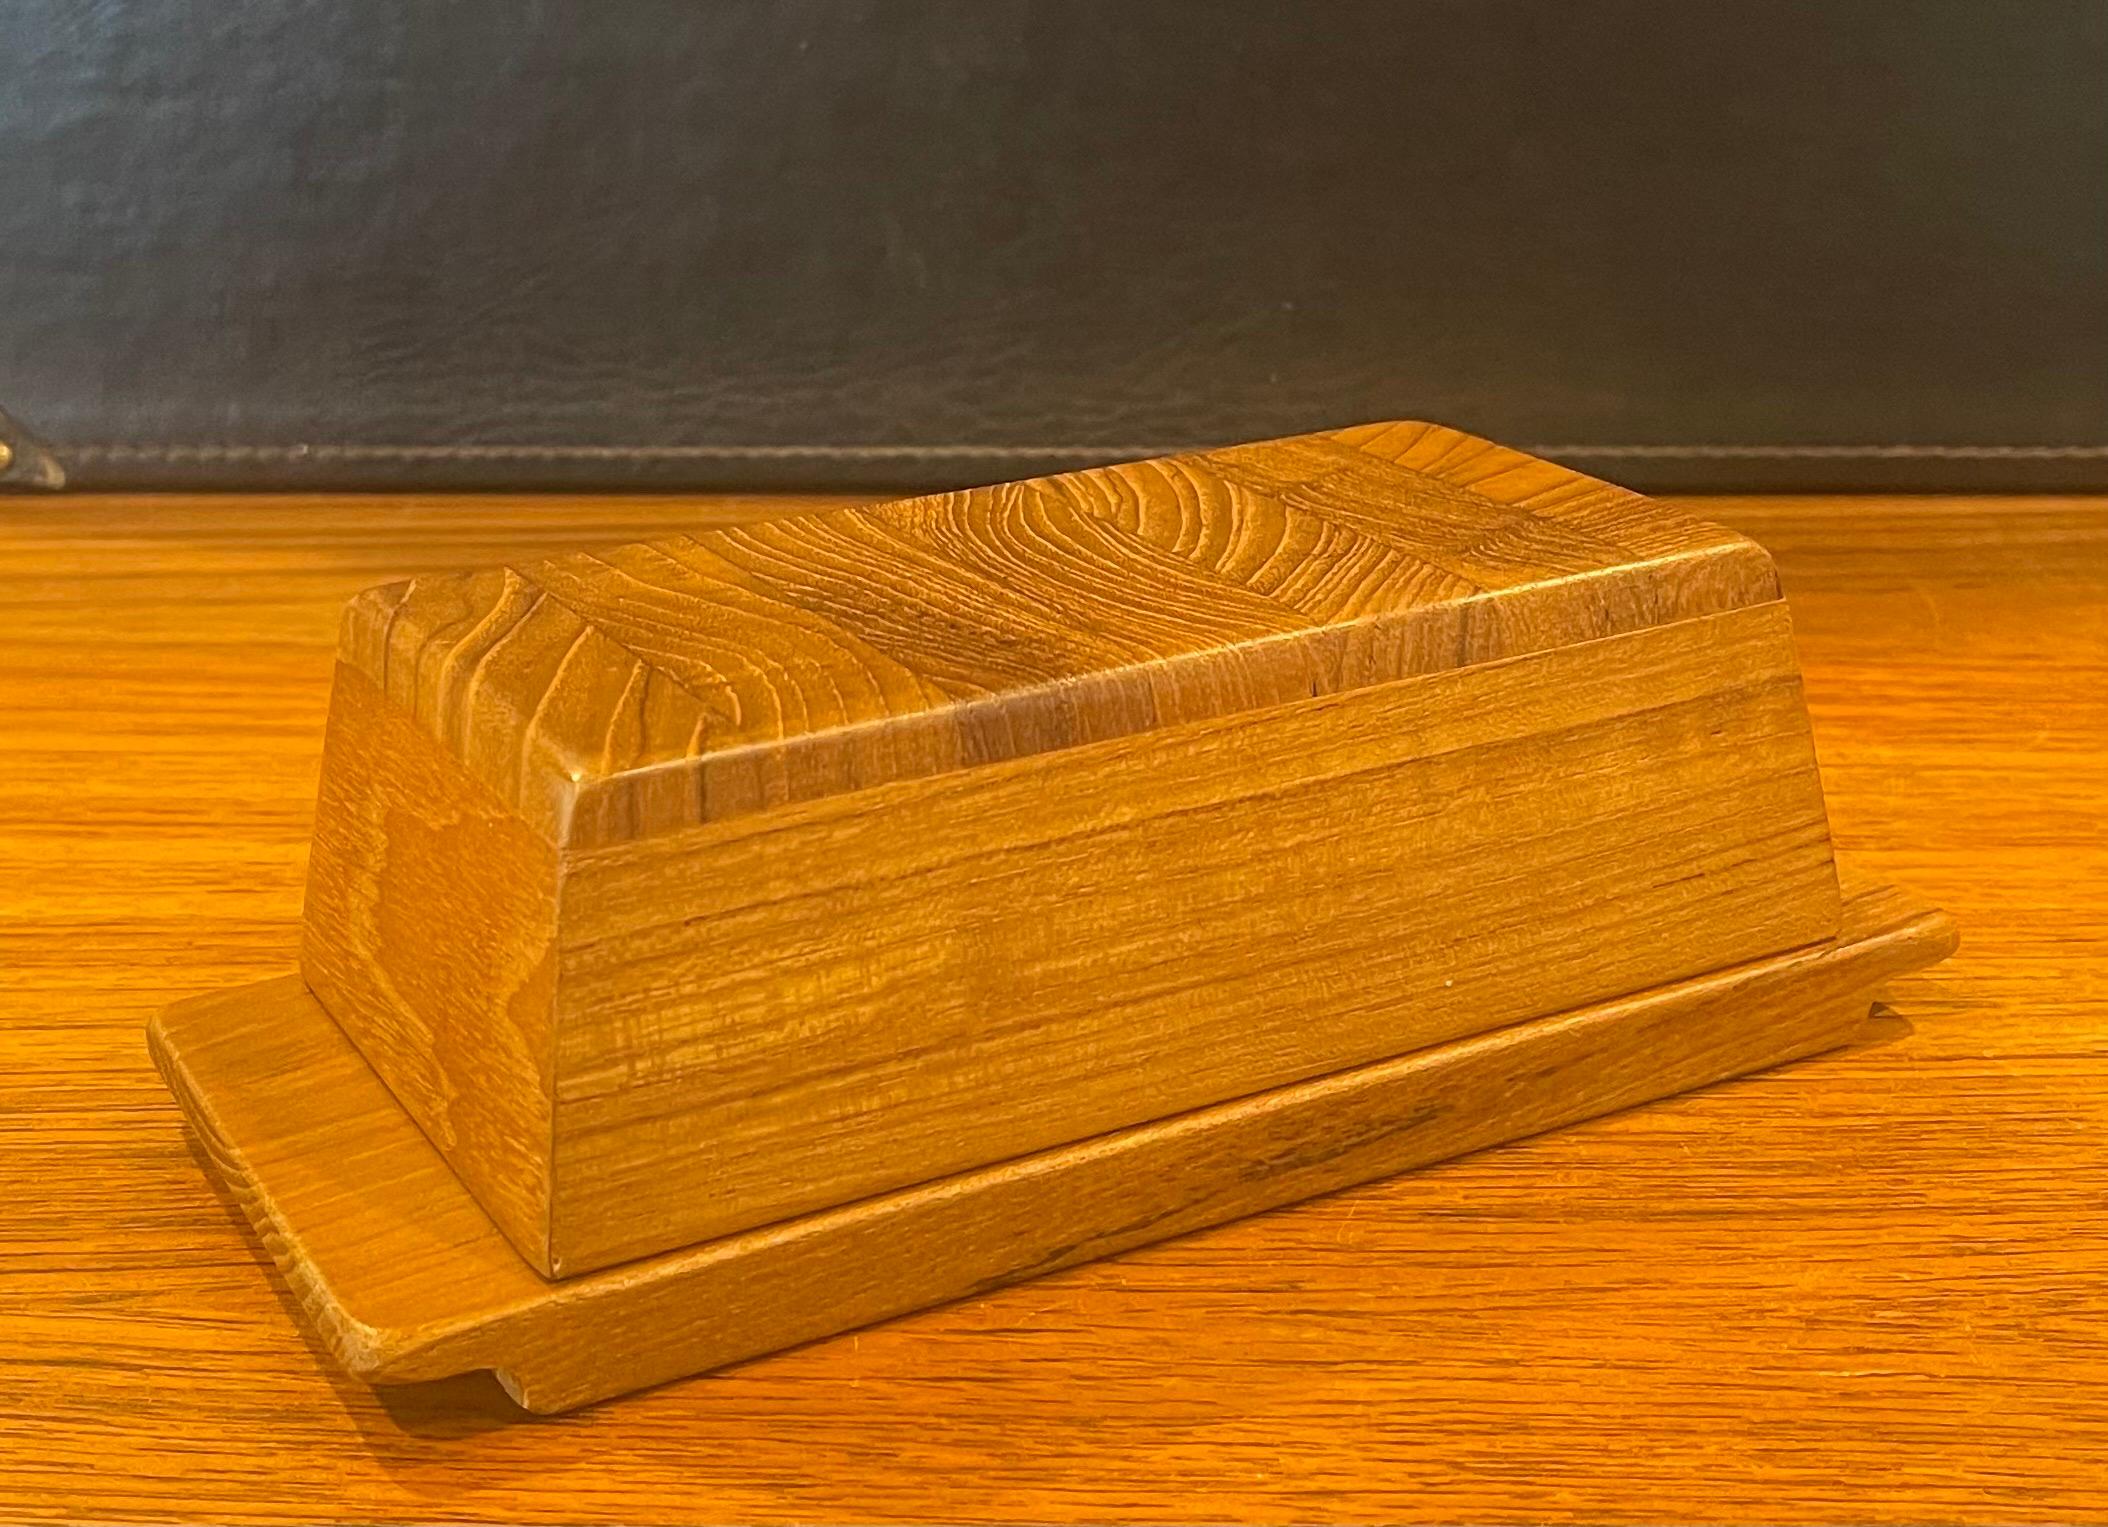 Scandinavian Modern Staved Teak Lidded Butter Box / Container by Sigvard Nilsson for Sowe Konst For Sale